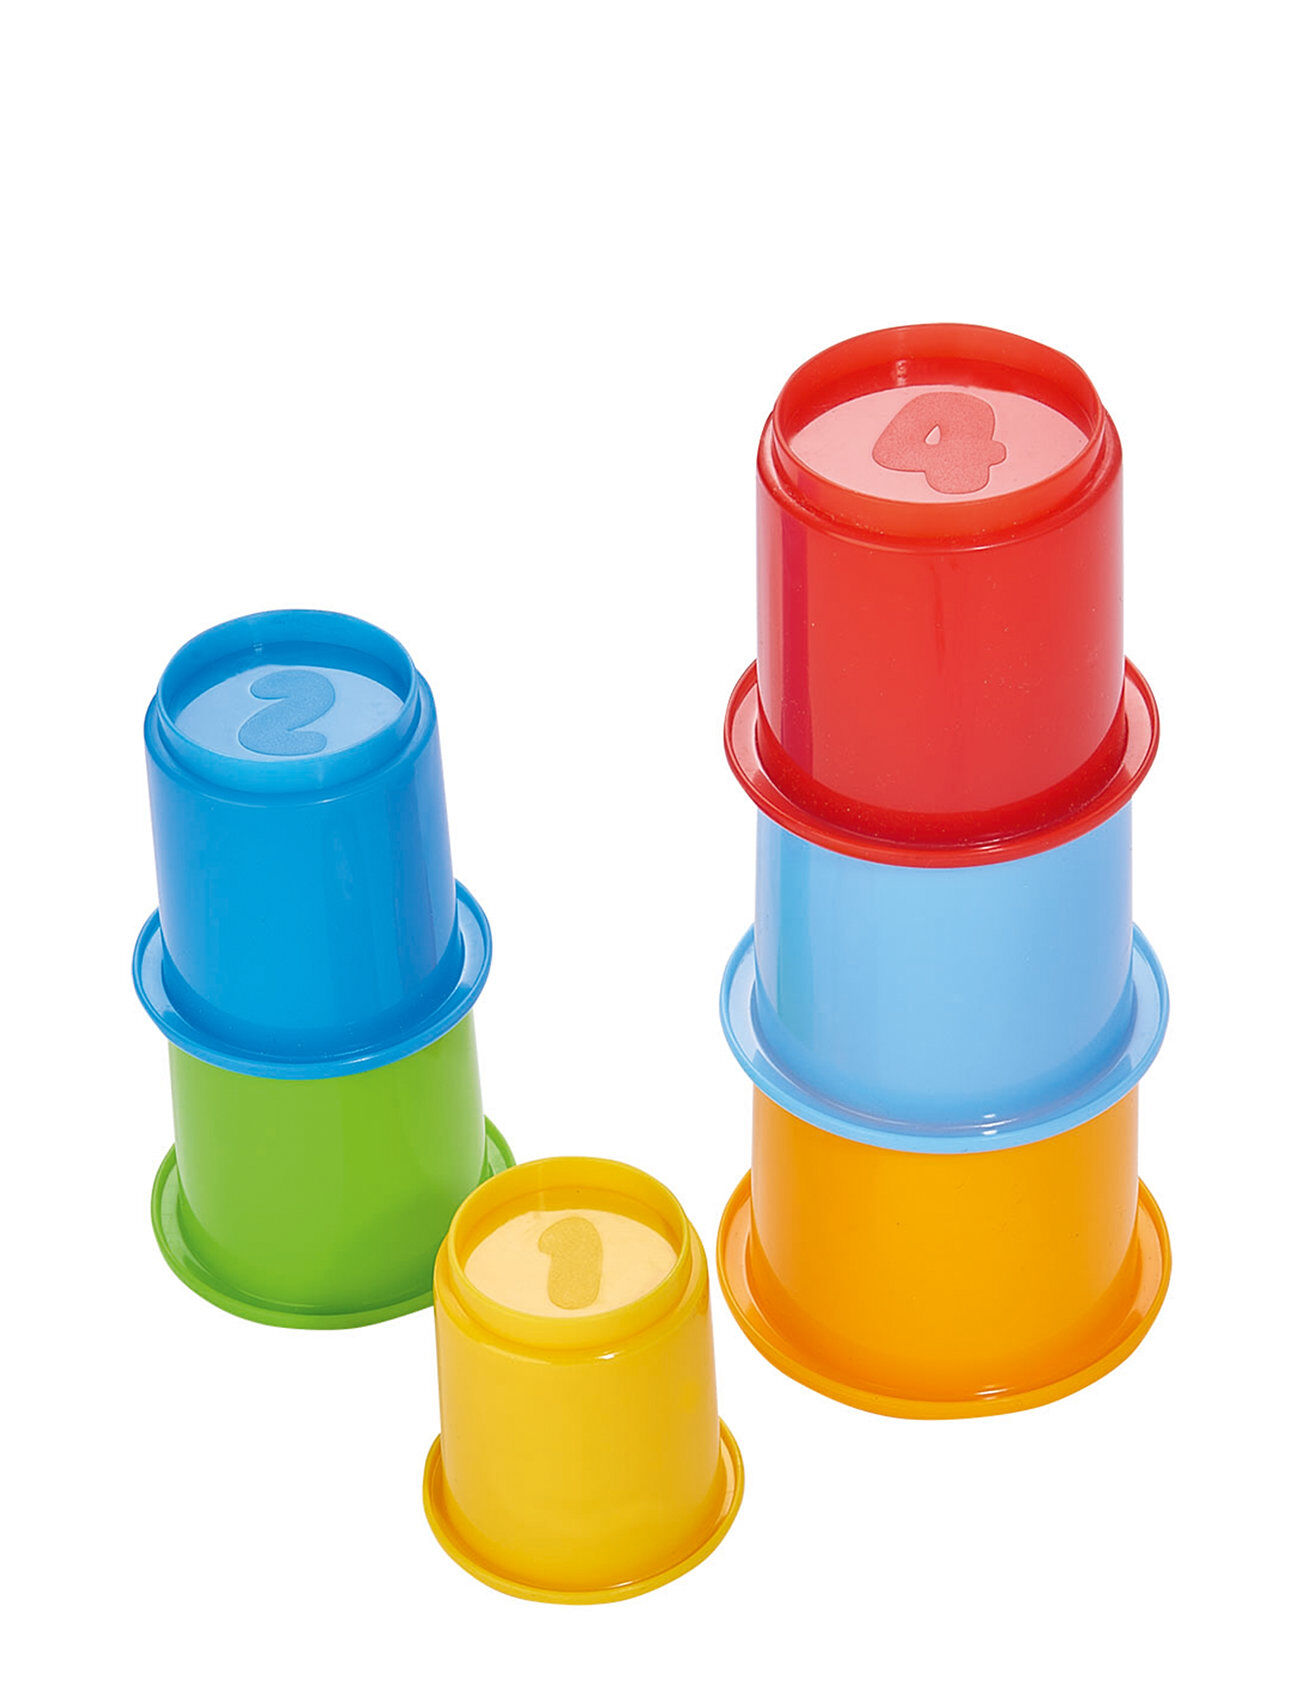 Simba Toys Abc - Stacking Cups Toys Baby Toys Educational Toys Stackable Blocks Multi/mønstret Simba Toys